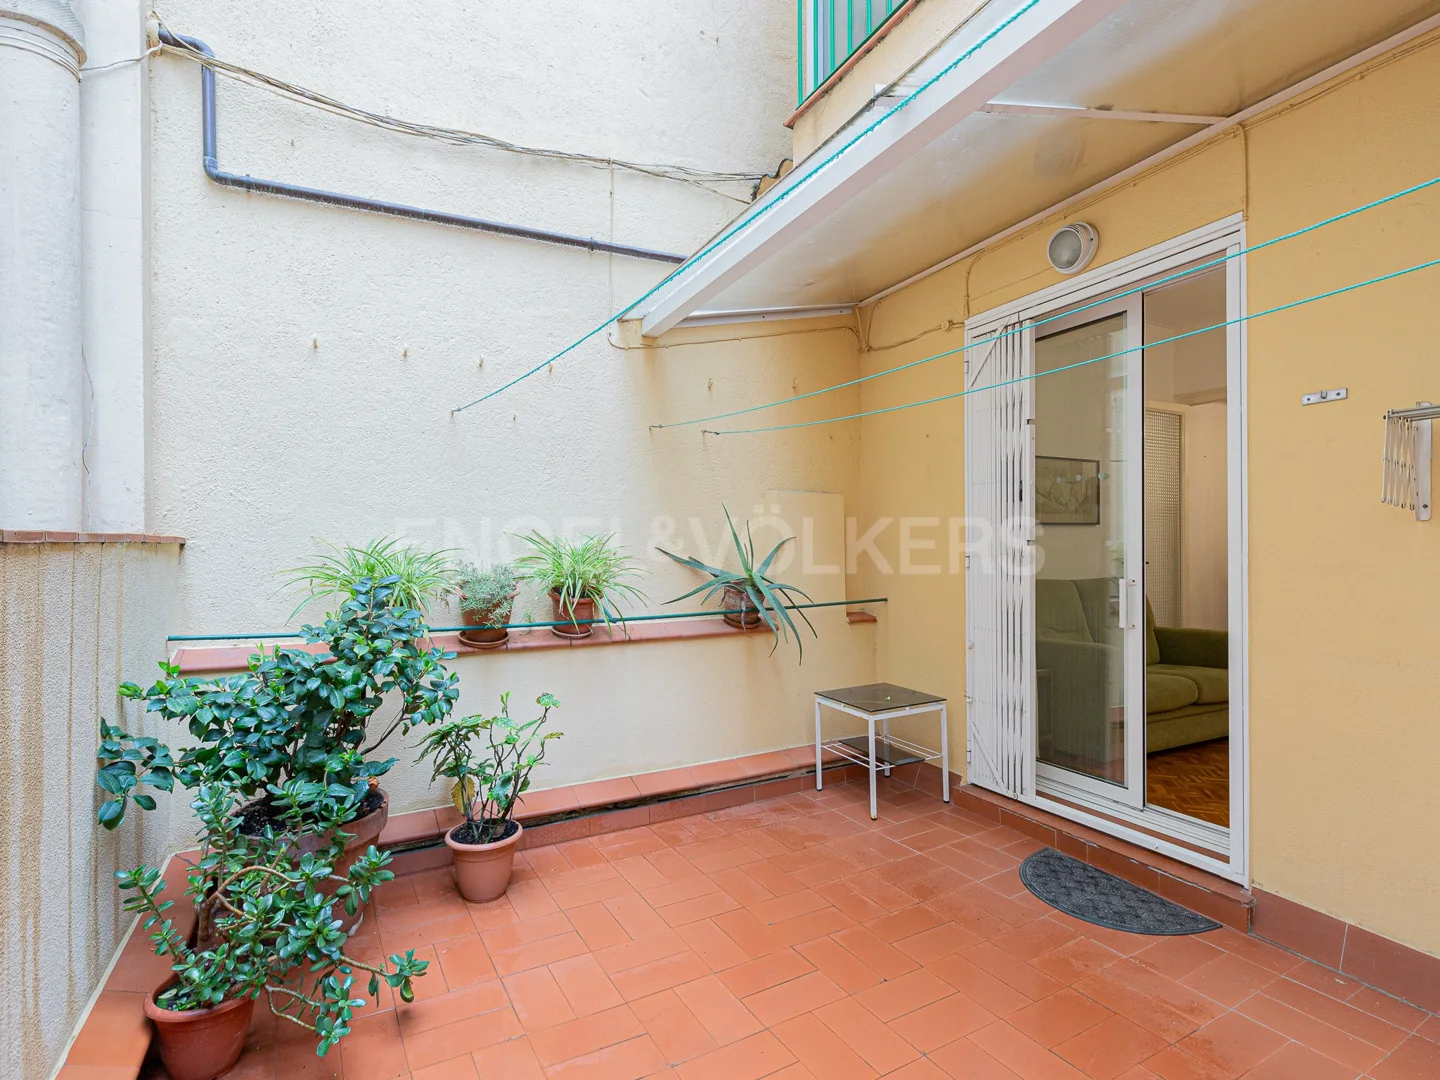 Apartment to renovate in good condition, with interior terrace